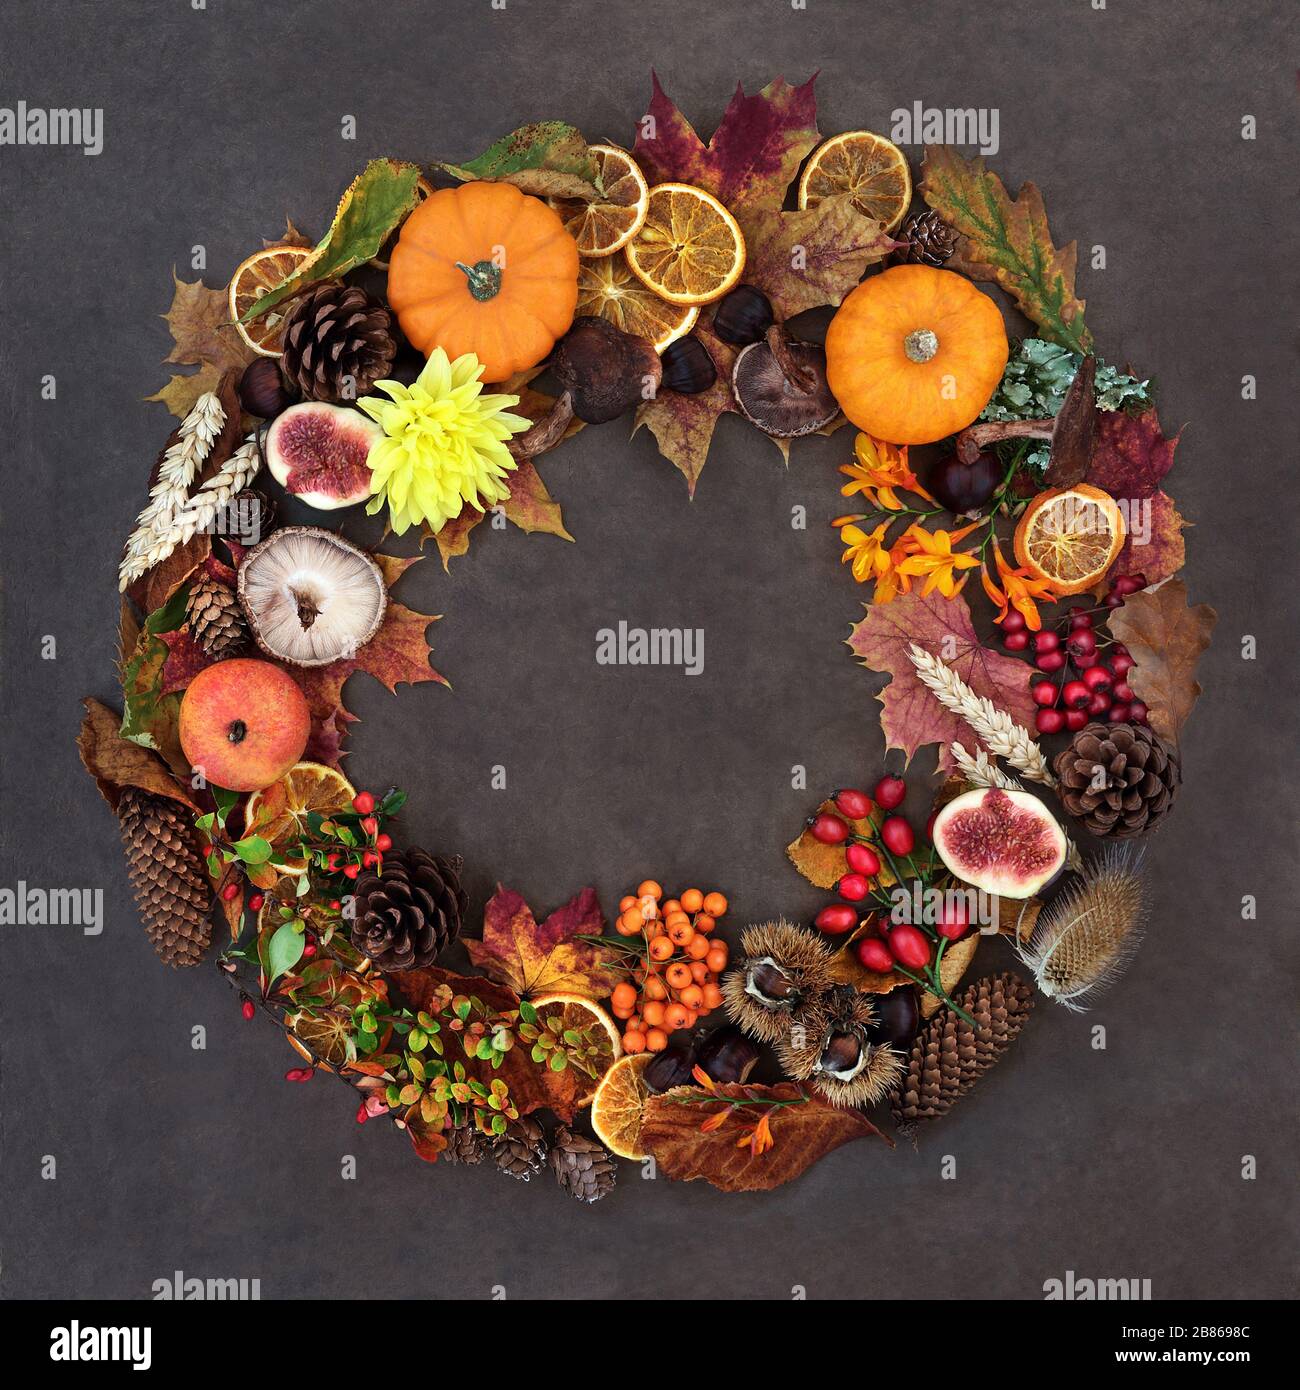 Autumn harvest festival wreath composition with a variety of natural flora, fauna and food on lokta  background. Stock Photo